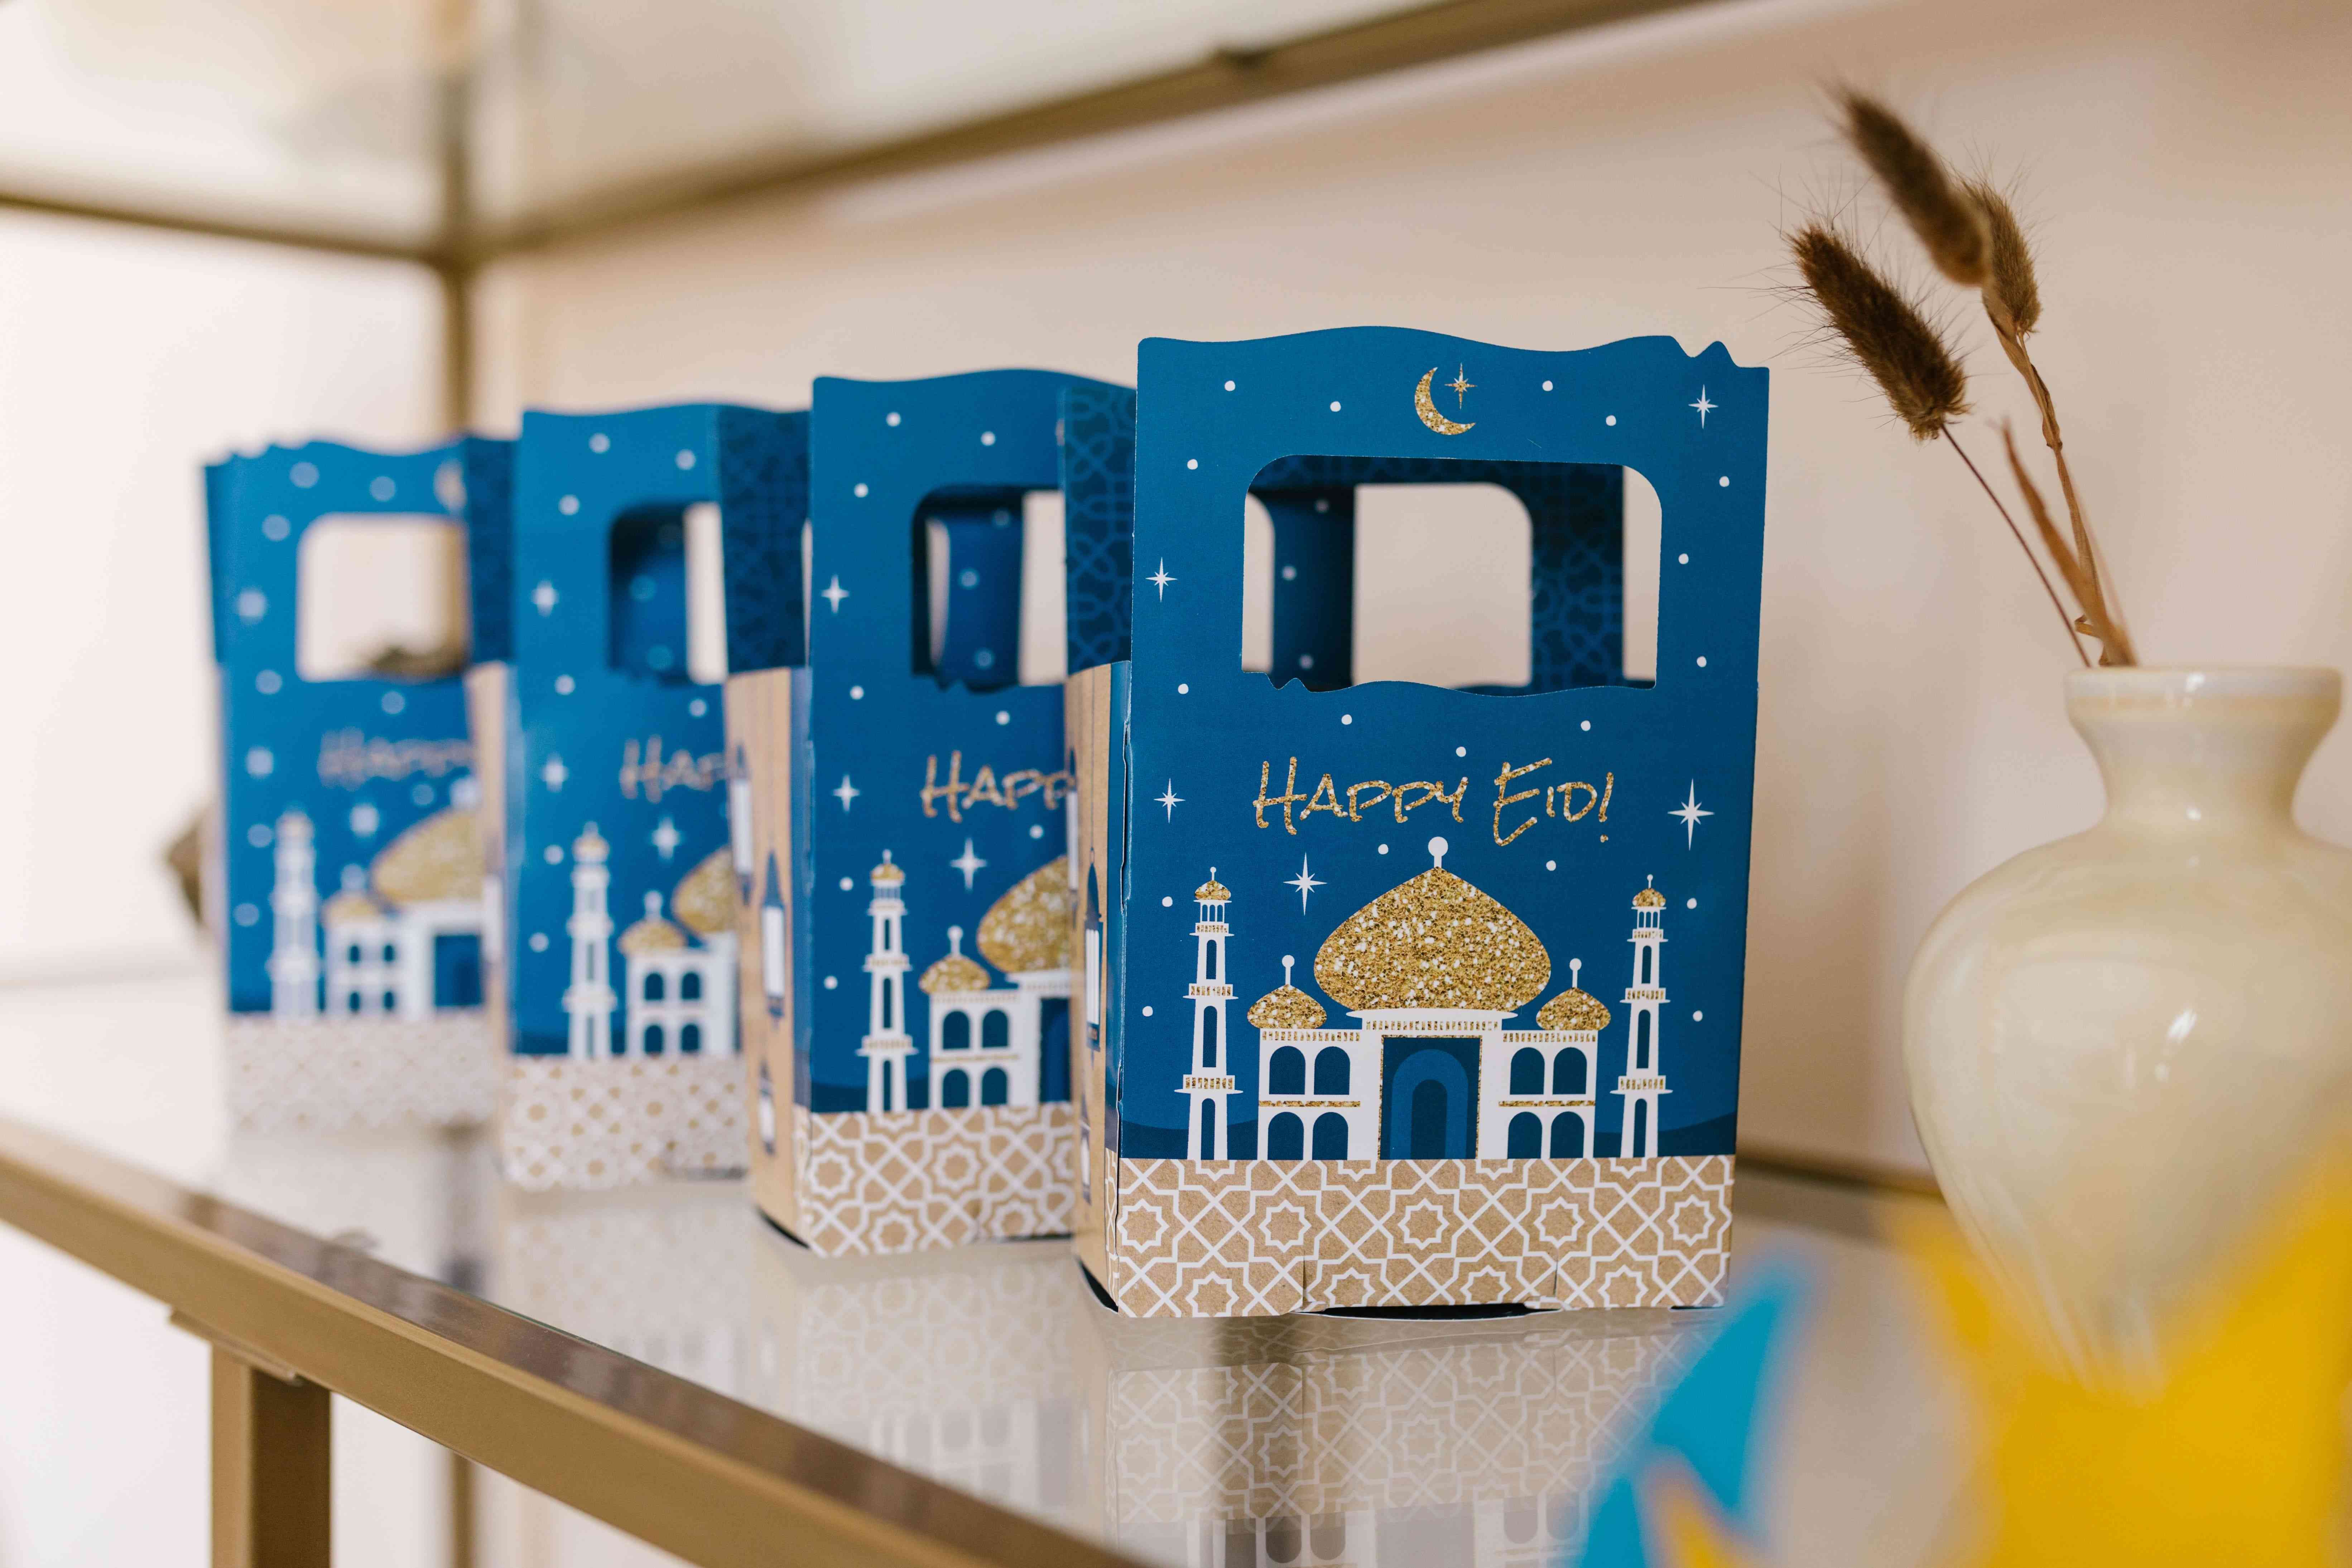 Ramadan is just around the corner and it’s time to give some gifts to your family!